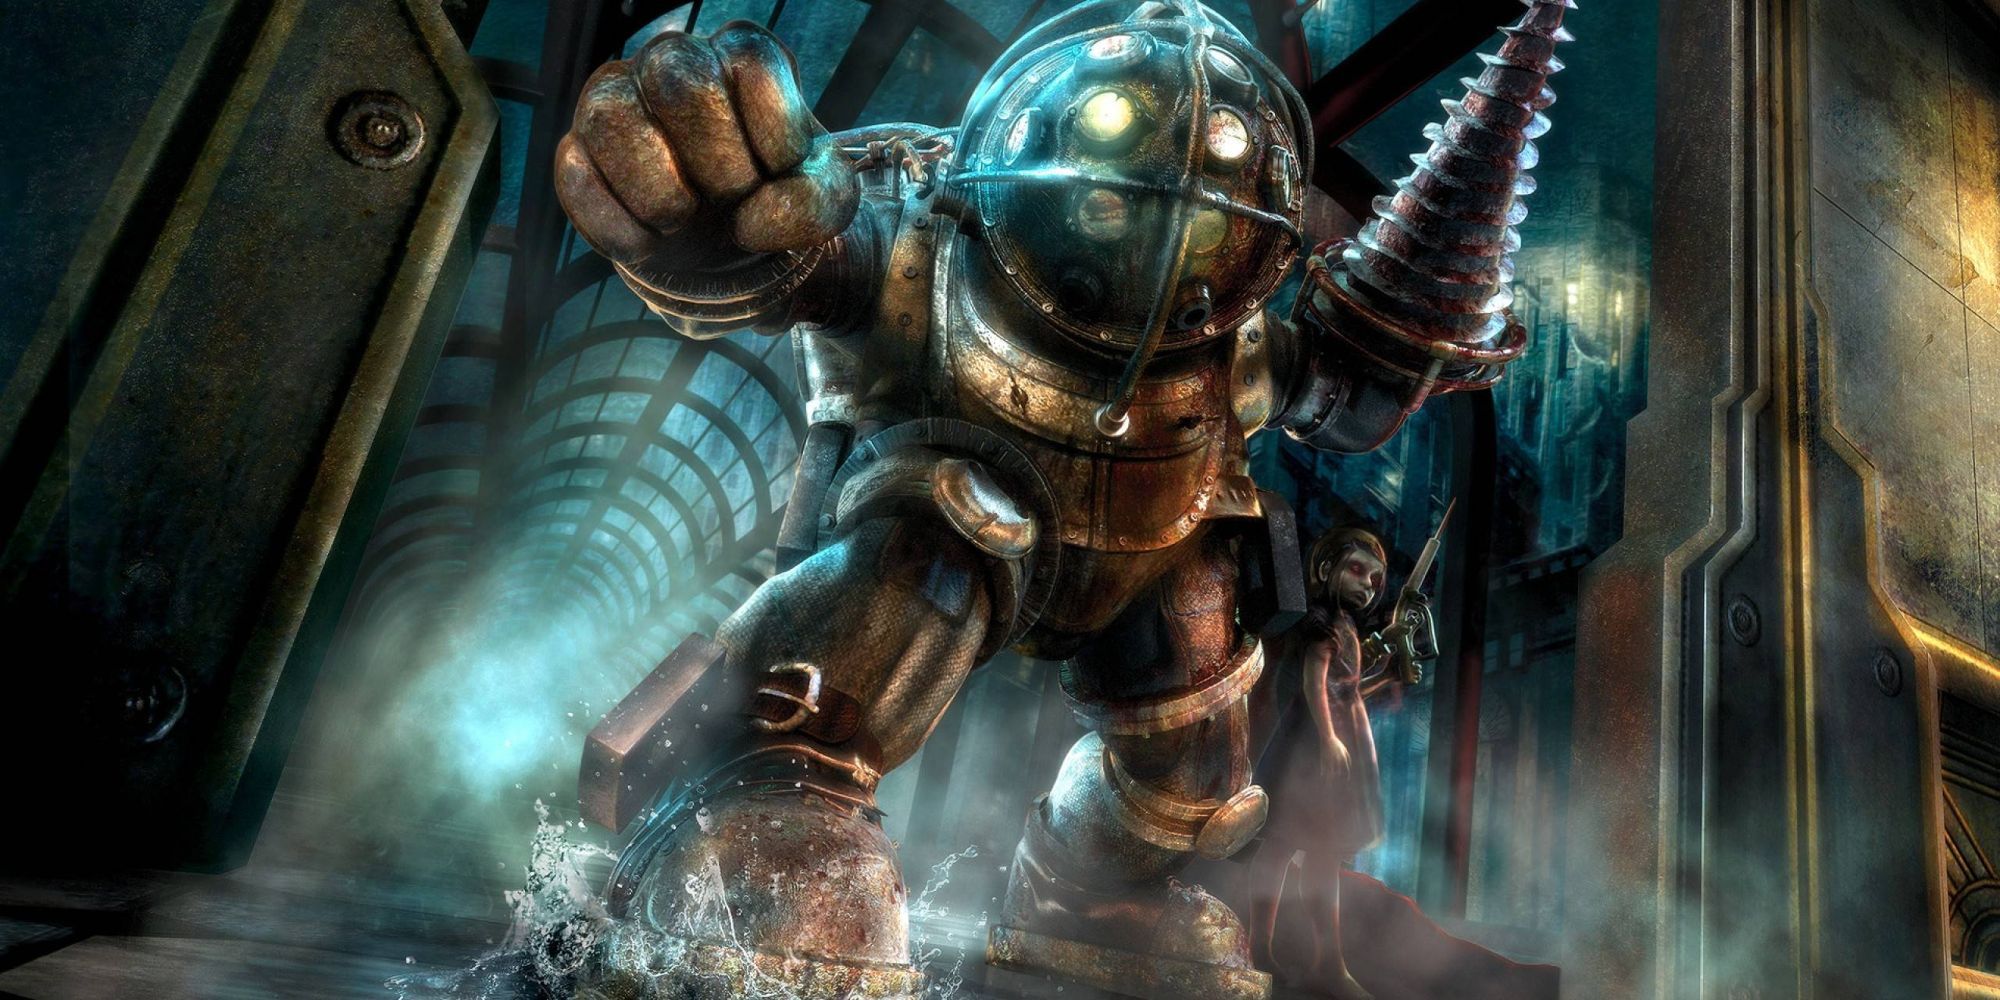 A poster for Bioshock featuring the iconic Bouncer-type Big Daddy alongside a Little Sister.